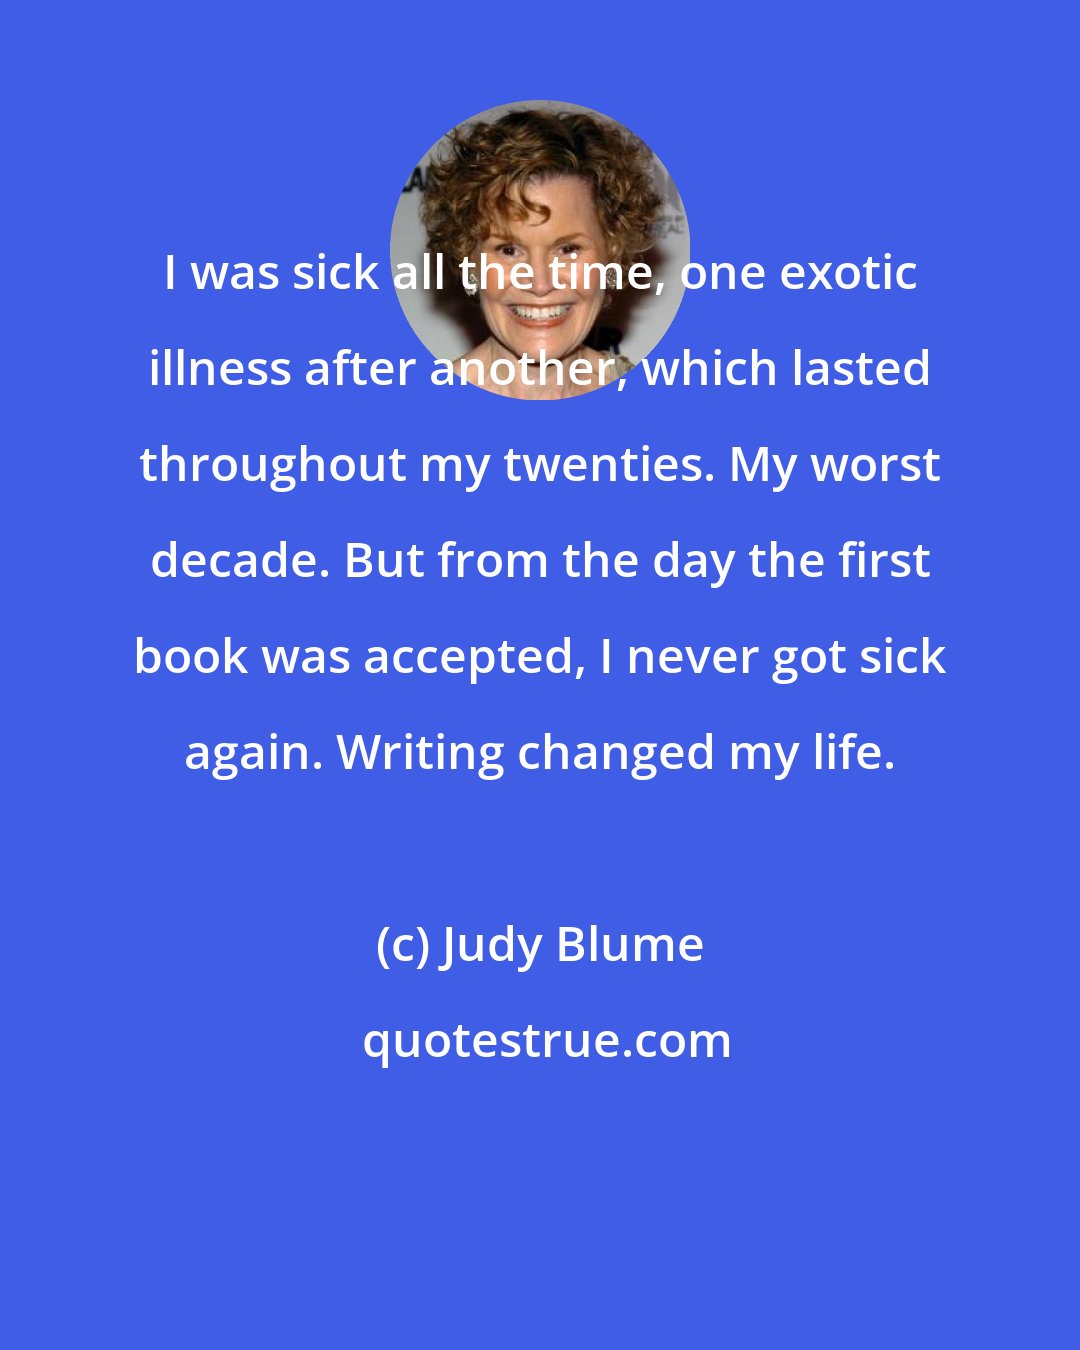 Judy Blume: I was sick all the time, one exotic illness after another, which lasted throughout my twenties. My worst decade. But from the day the first book was accepted, I never got sick again. Writing changed my life.